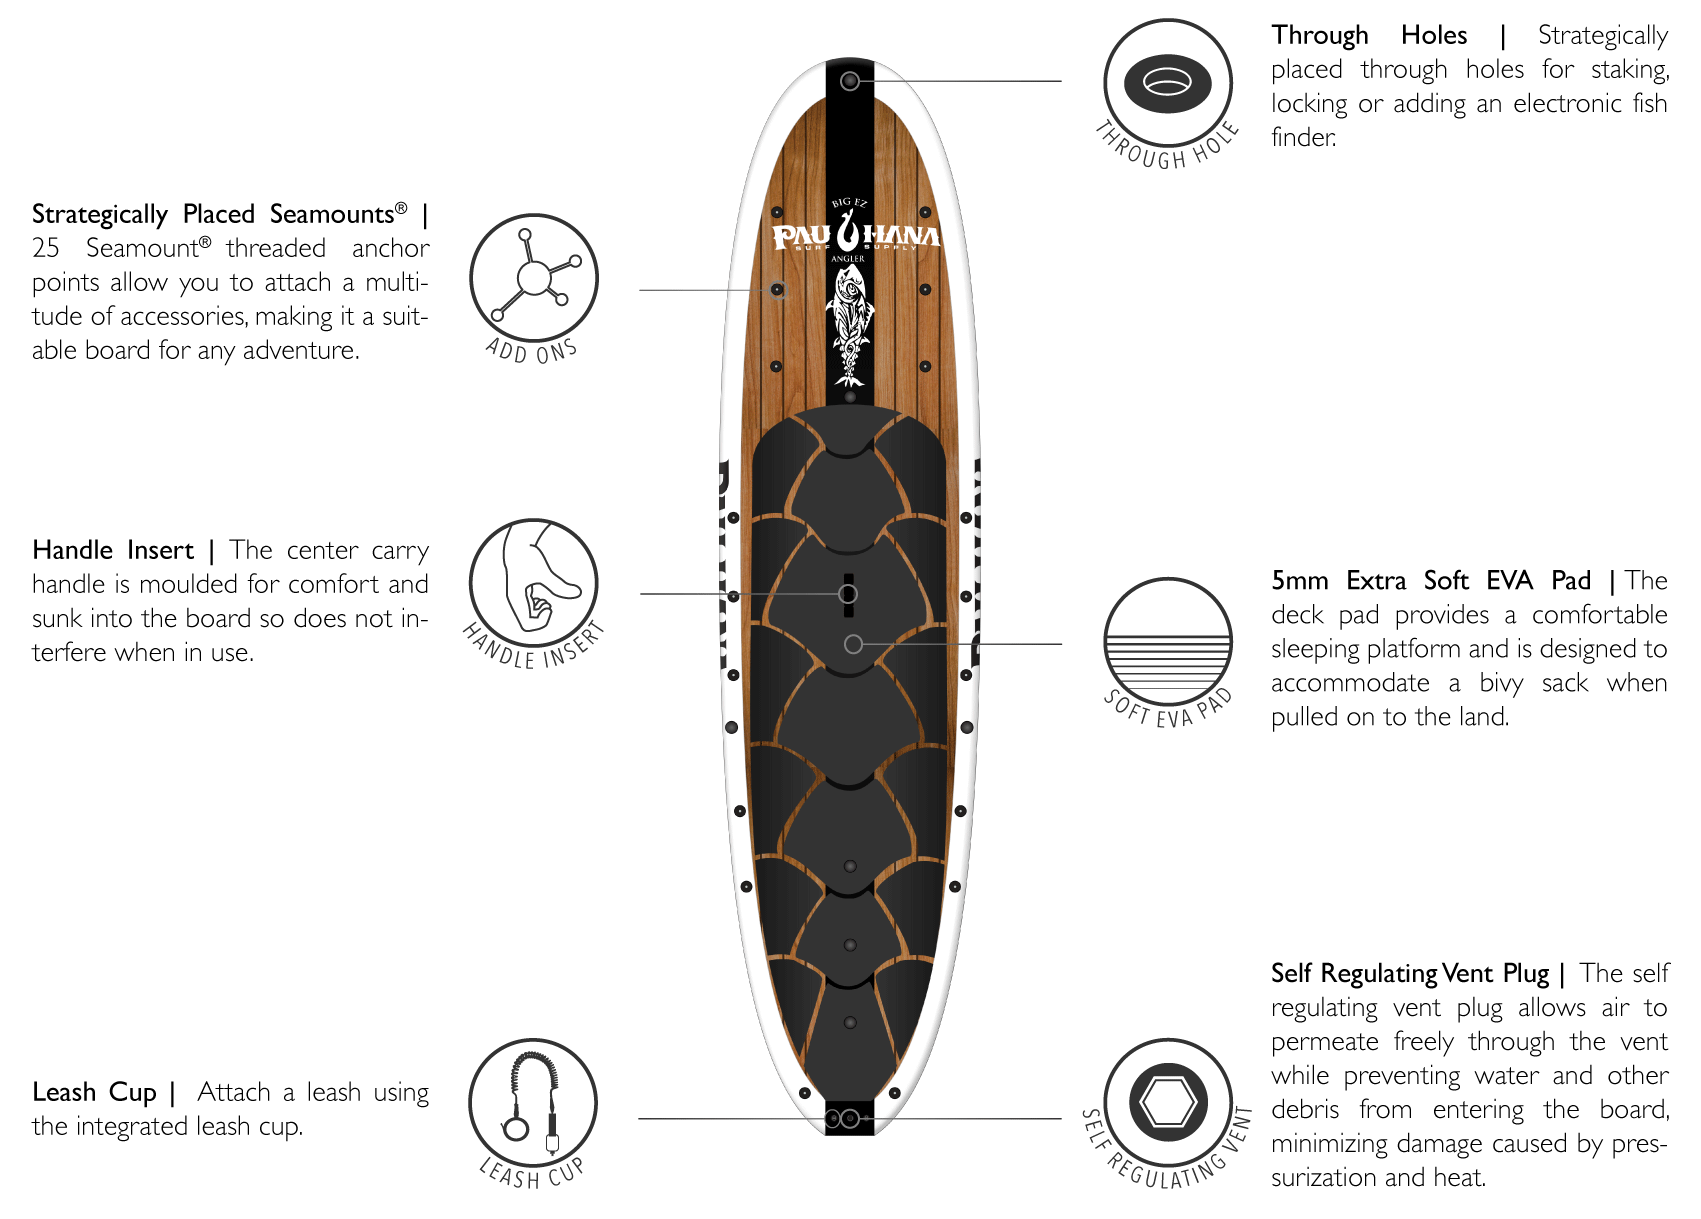 This is the best fishing paddle board by Pau Hana. Front features of the Big EZ Angler SUP board including soft Eva pad, leash cup, center grab handle, strategically placed seamounts, and through holes